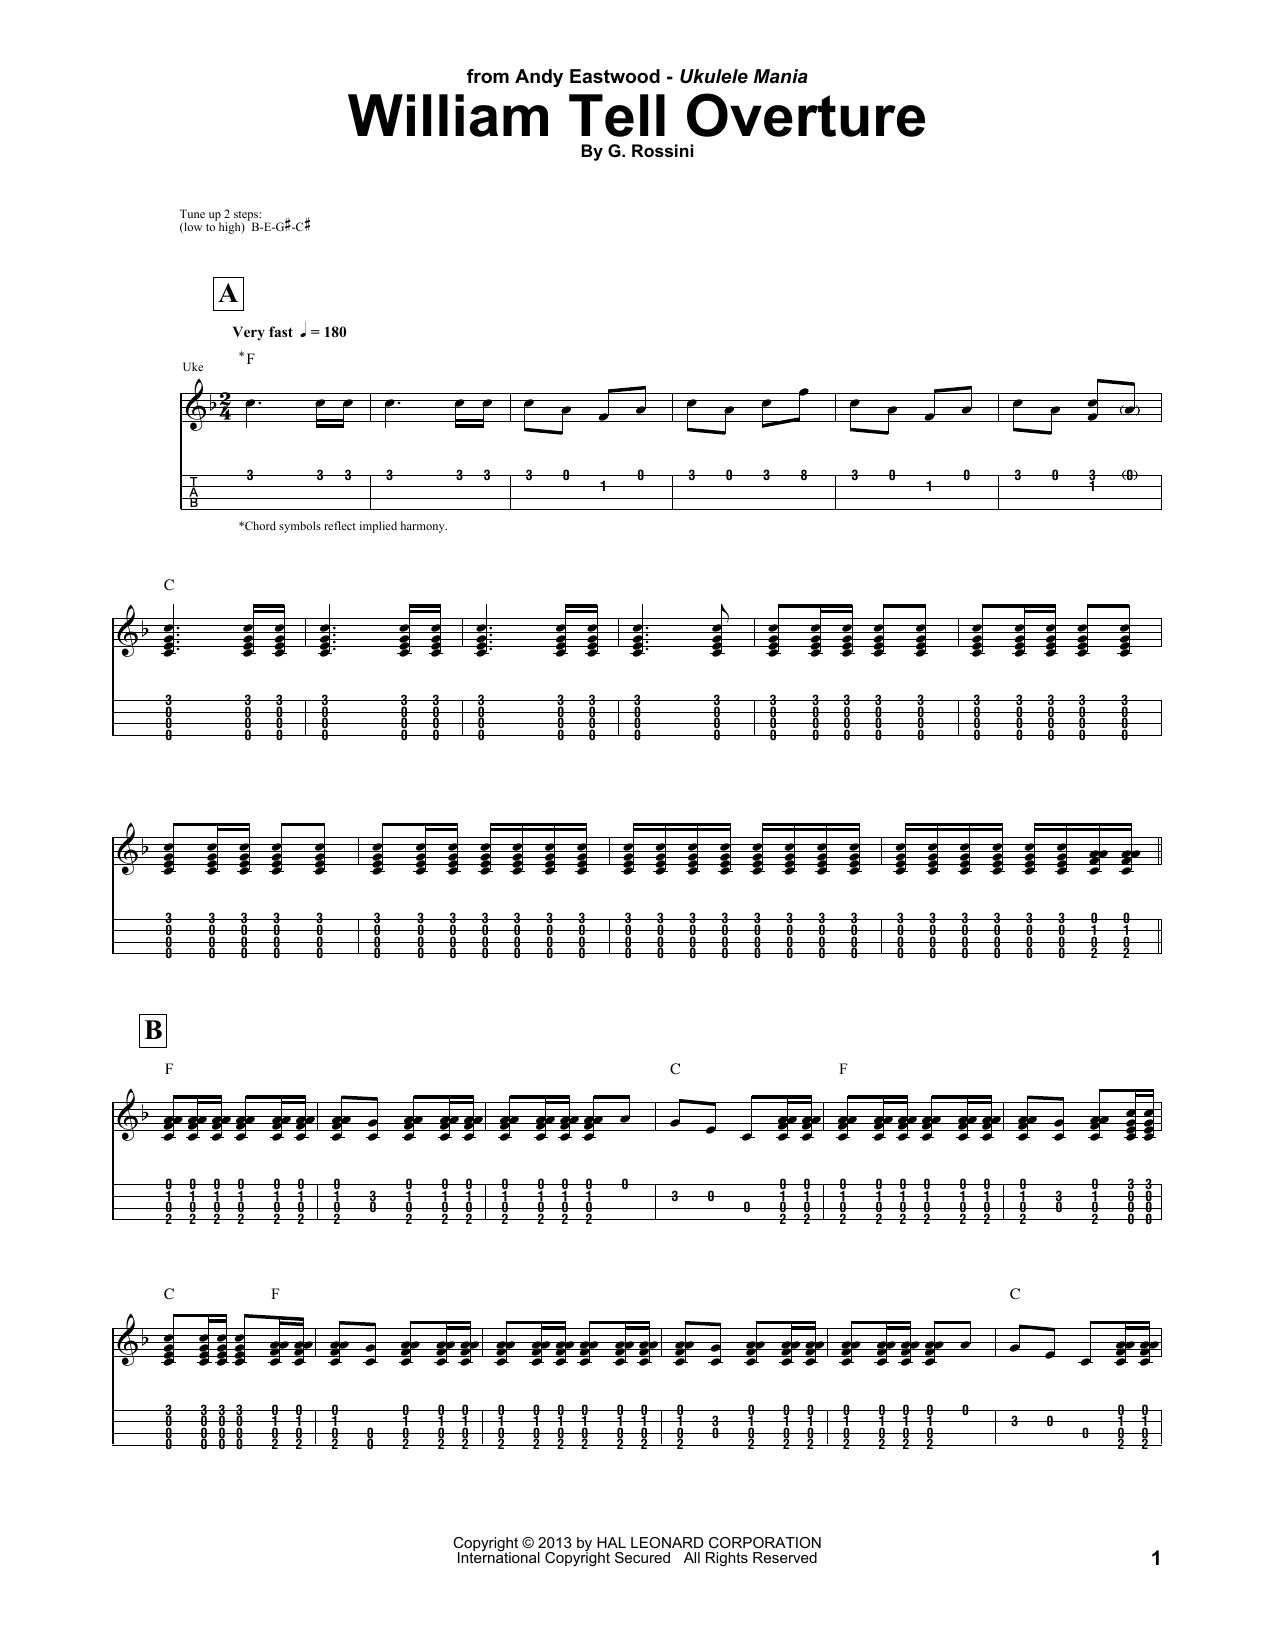 Andy Eastwood William Tell Overture sheet music notes and chords. Download Printable PDF.